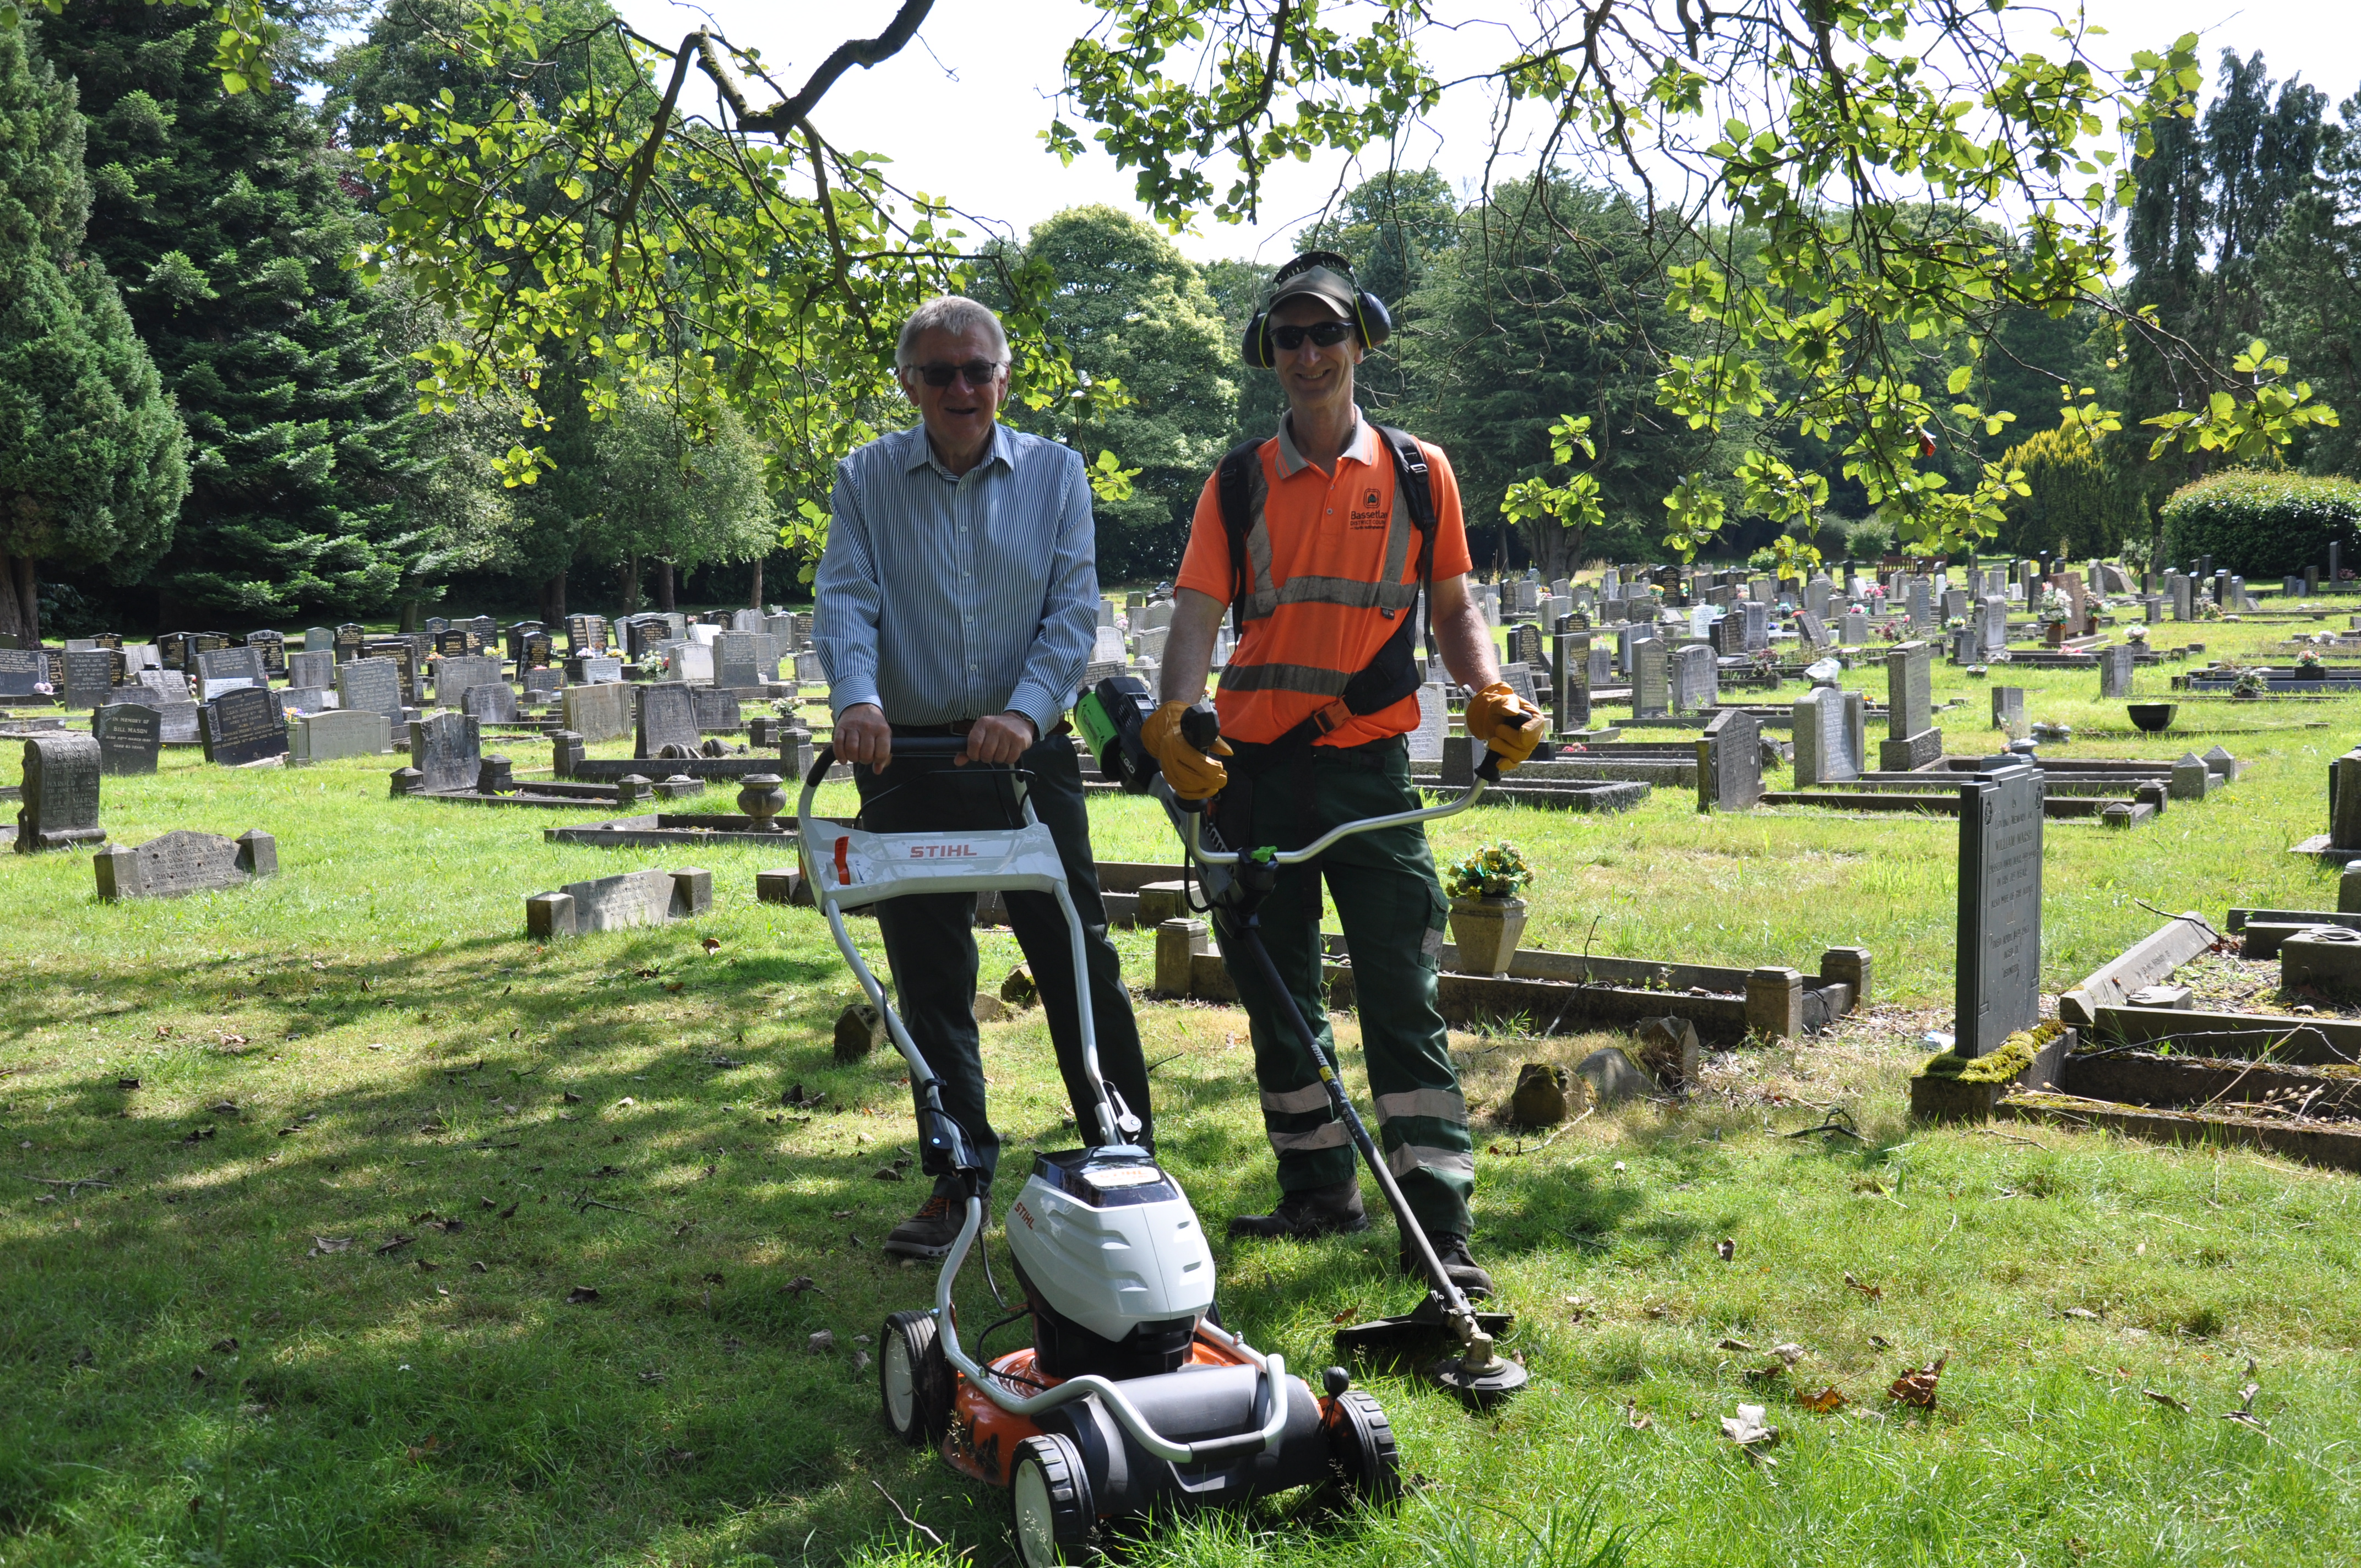 New environmentally friendly equipment on its way to Retford Cemetery